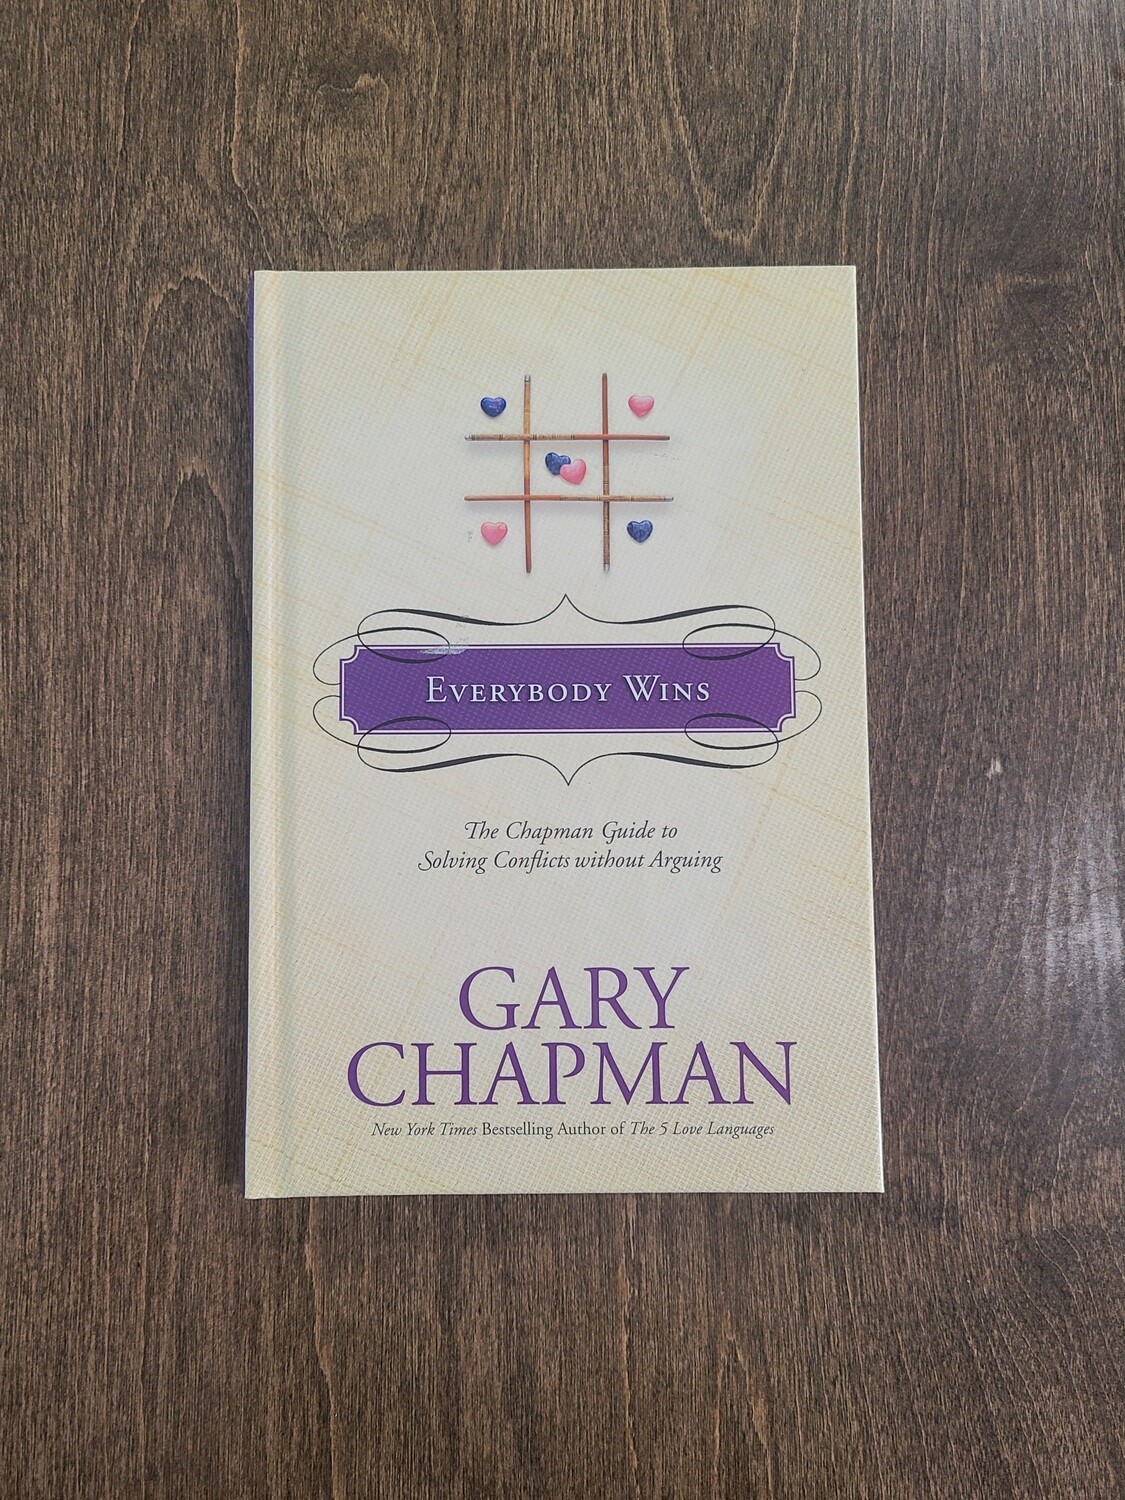 Everybody Wins: The Chapman Guide to Solving Conflicts without Arguing by Gary Chapman